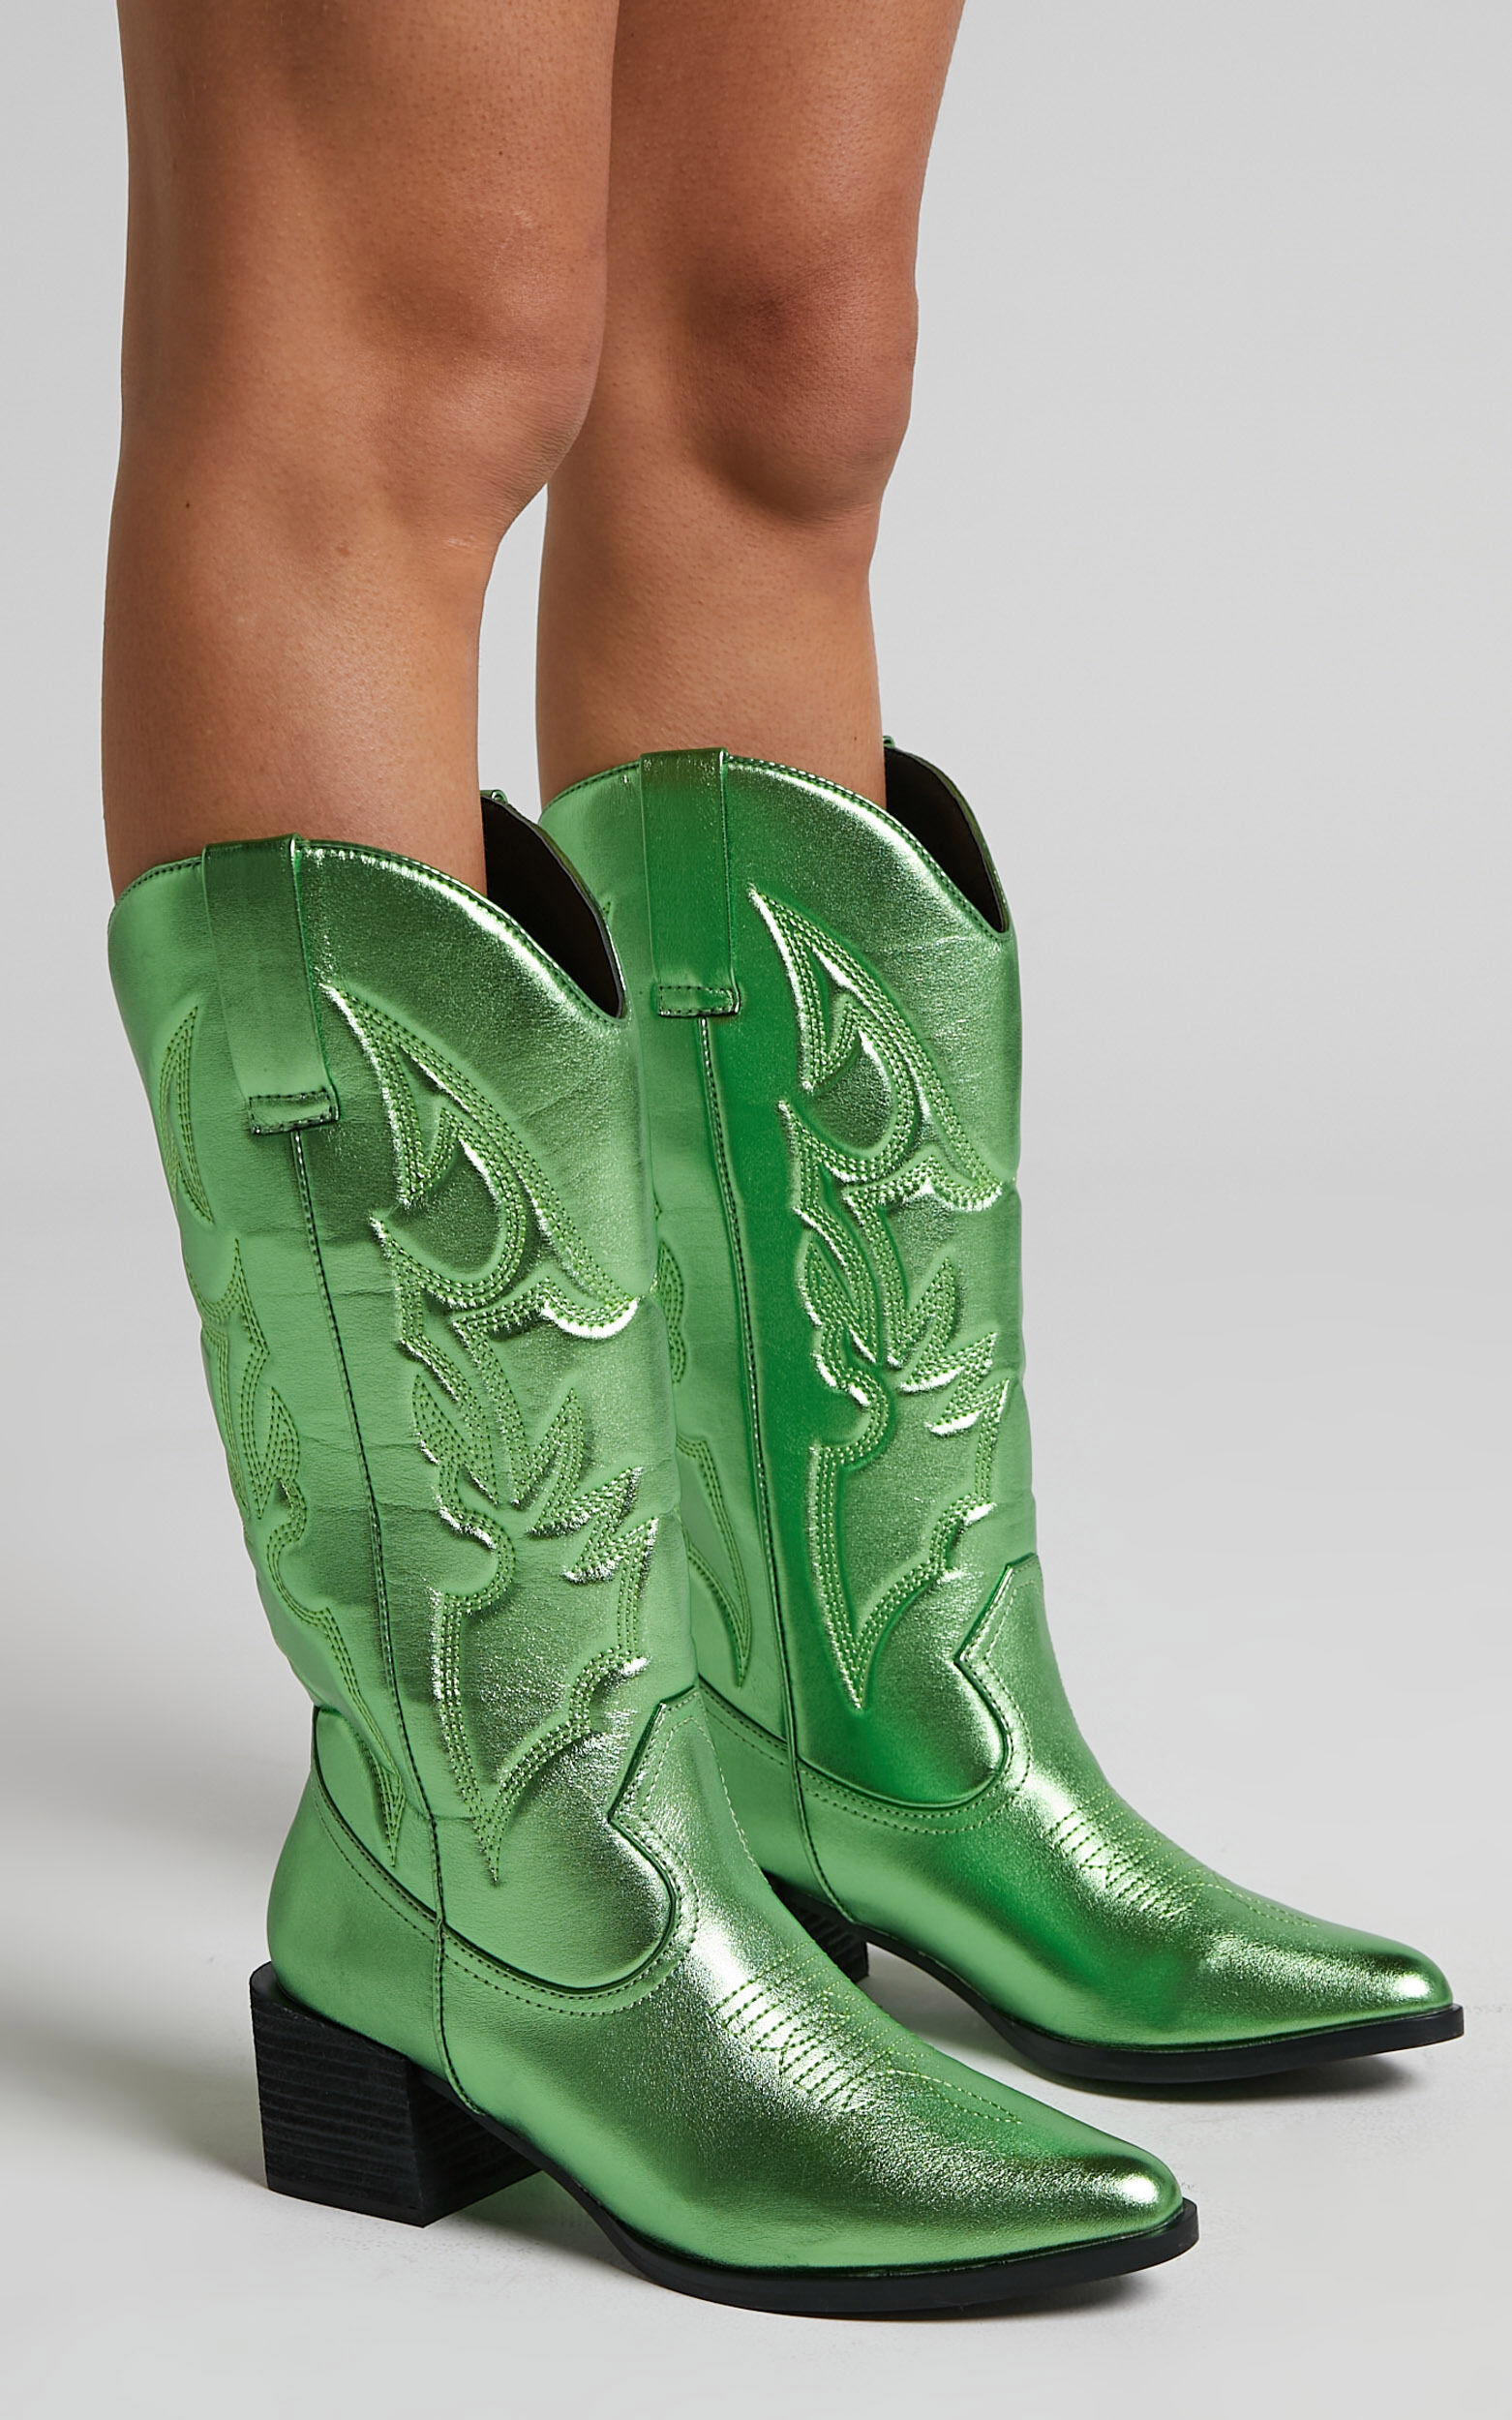 Therapy - Ranger Boots in Lime Metallic - 06, GRN1, super-hi-res image number null